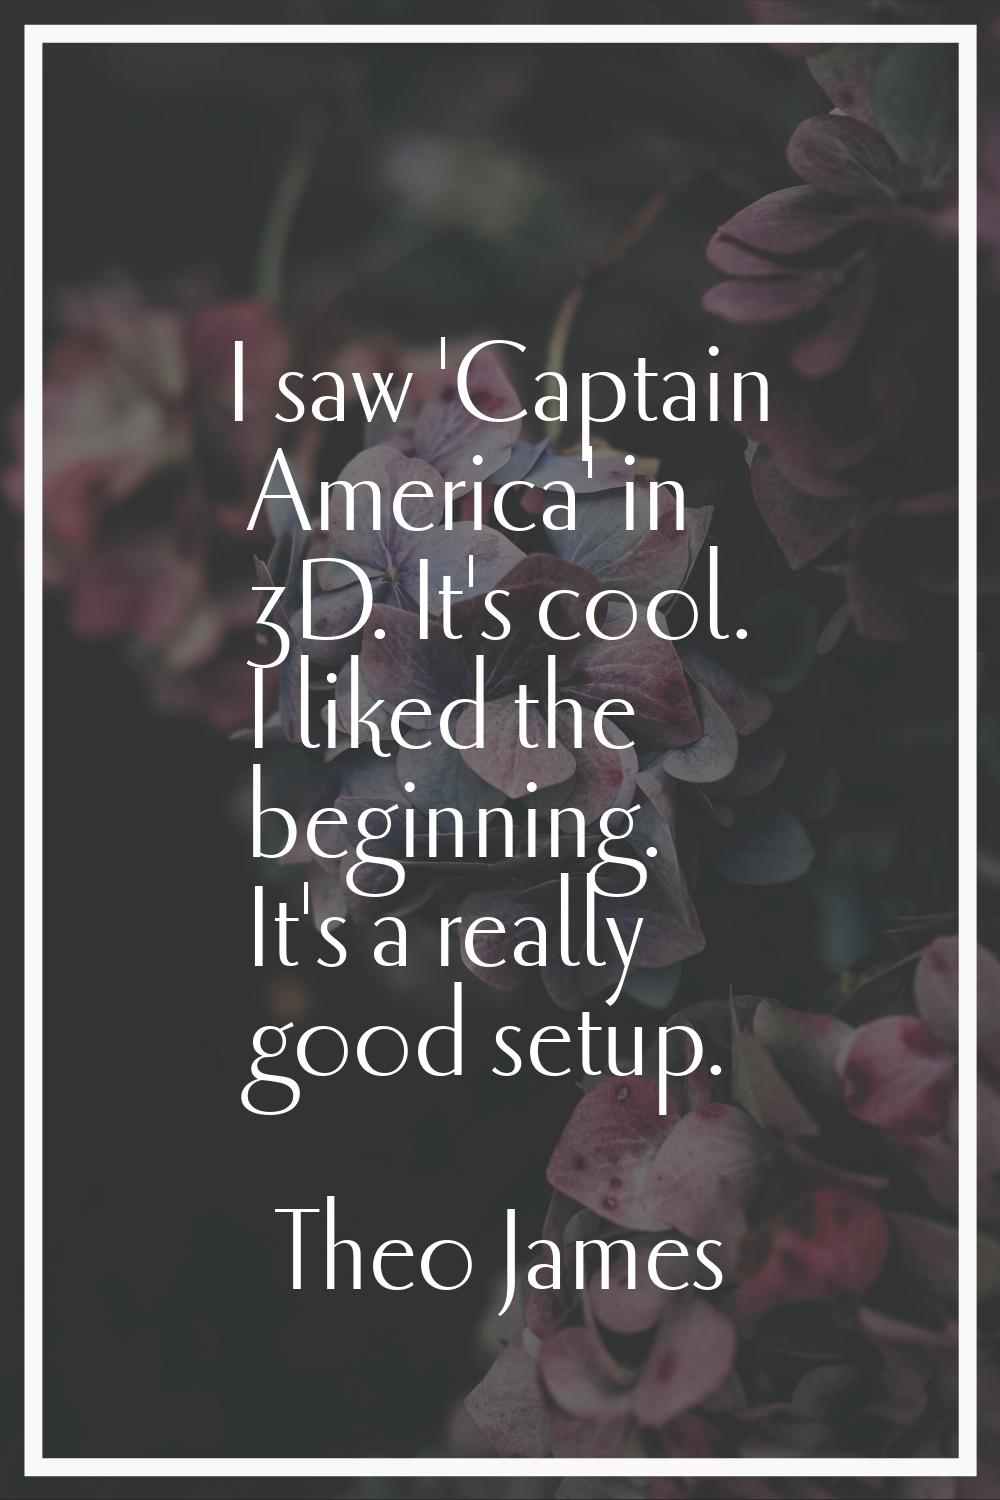 I saw 'Captain America' in 3D. It's cool. I liked the beginning. It's a really good setup.